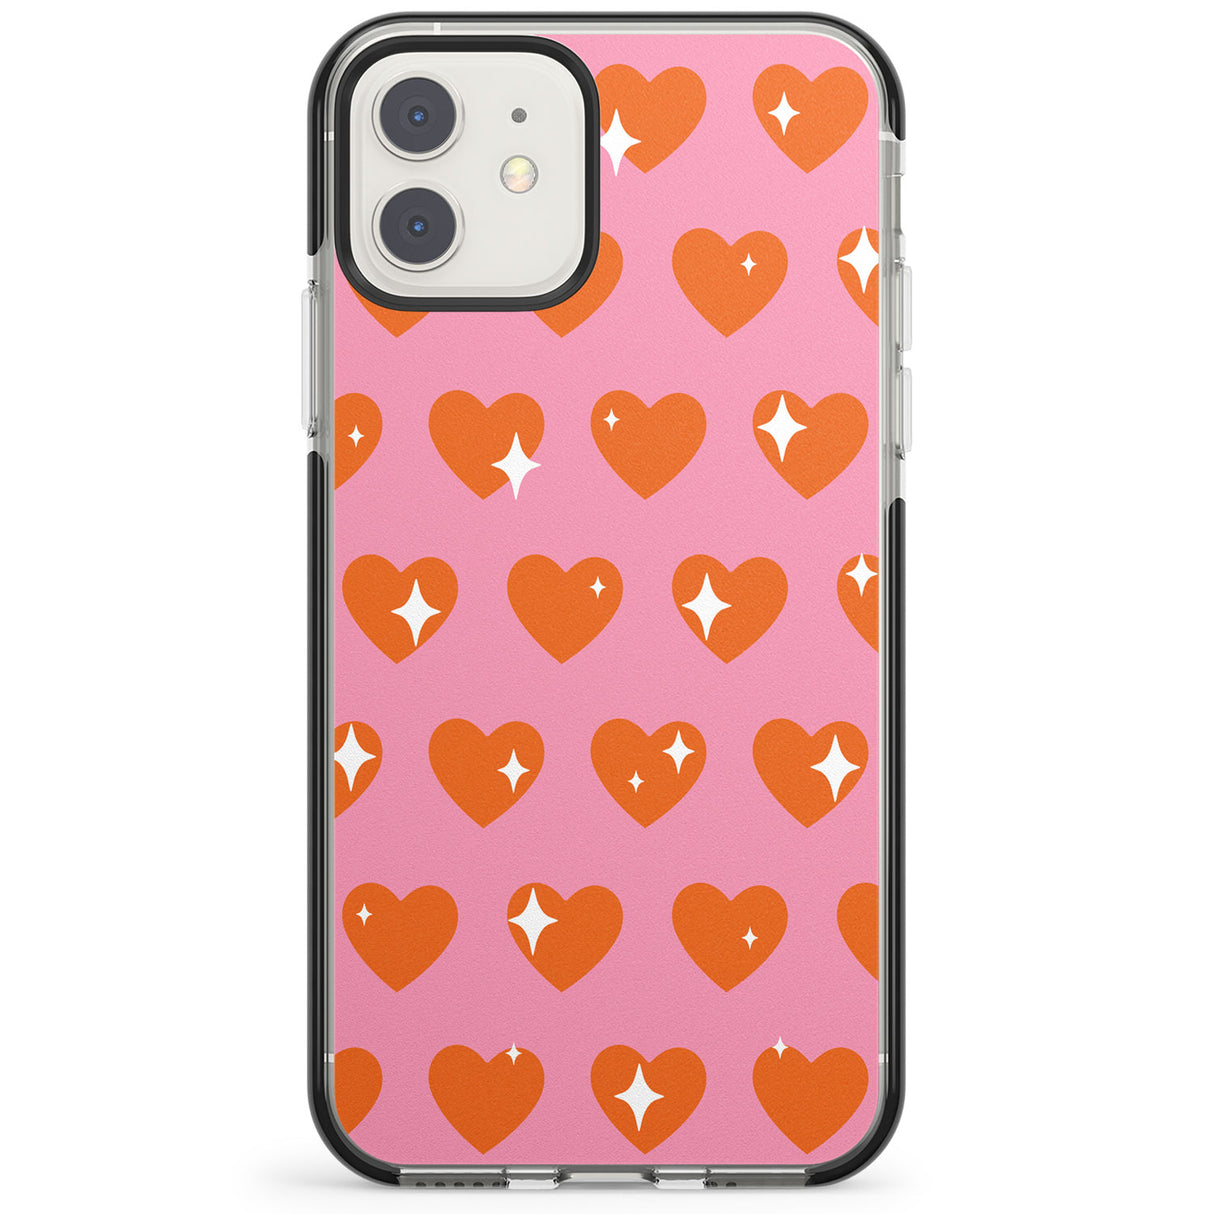 Sweet Hearts (Sunset) Impact Phone Case for iPhone 11, iphone 12